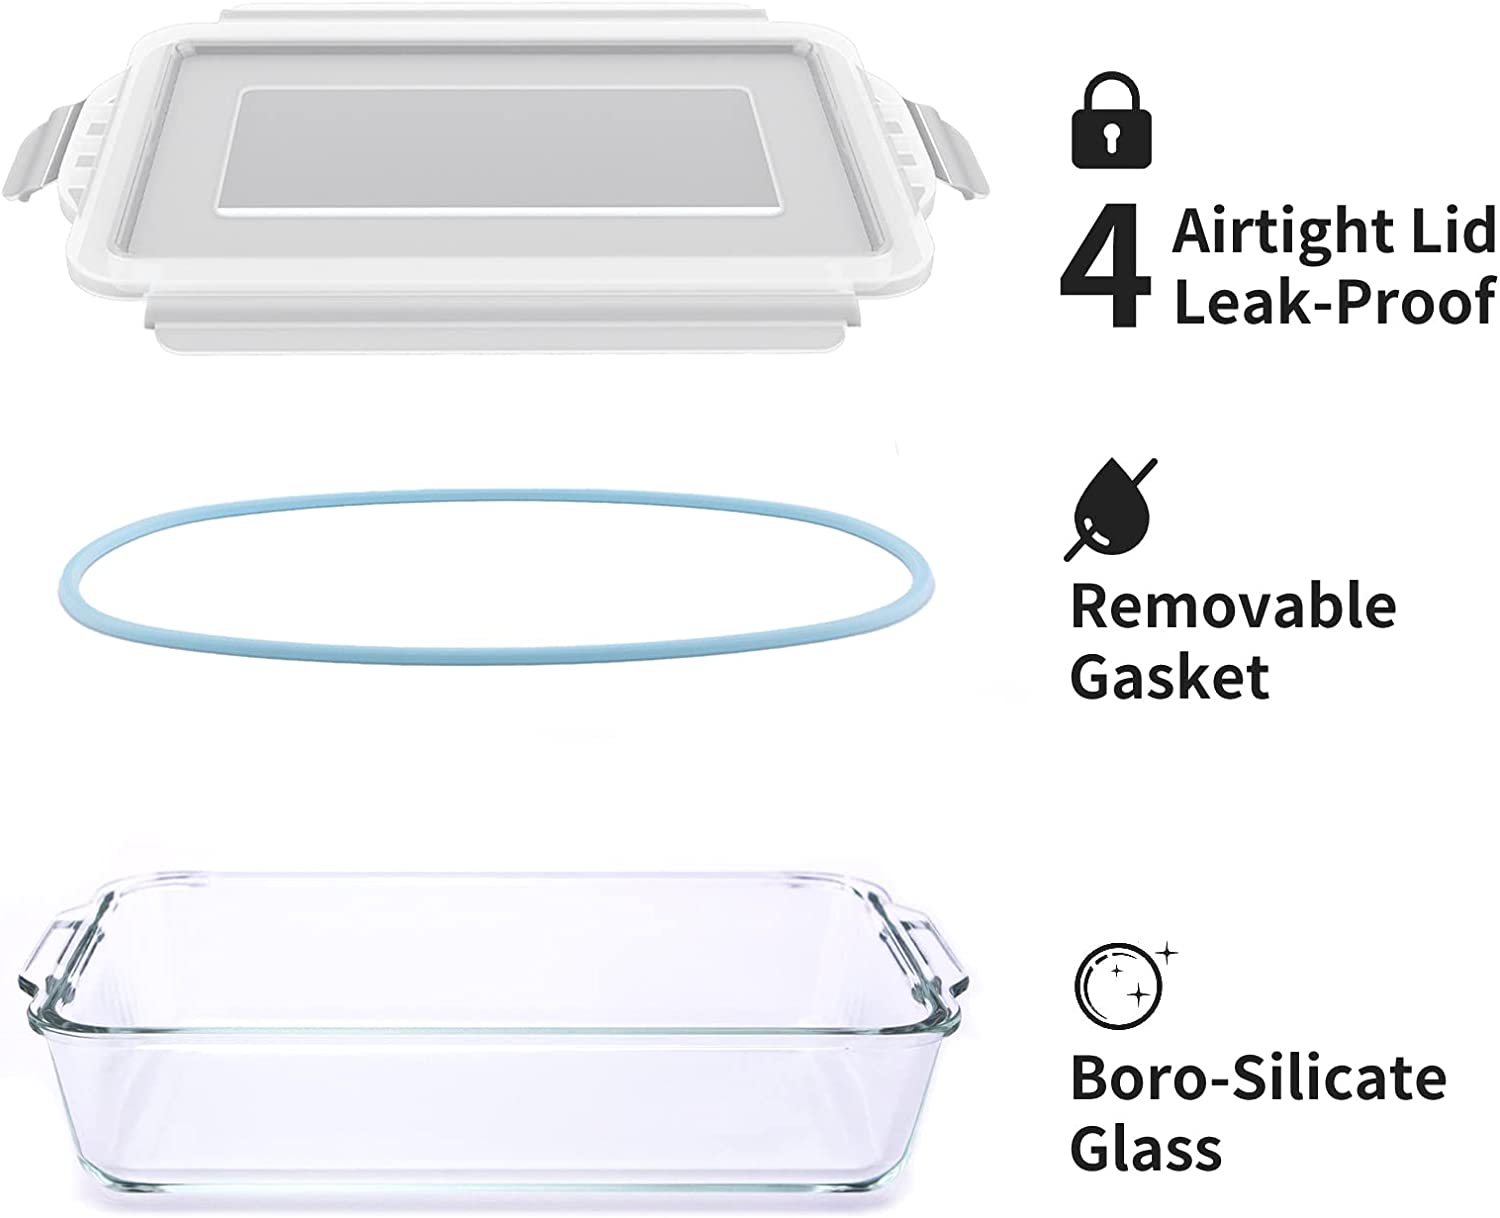 OXO Good Grips 2 qt Glass Baking Dish with Lid